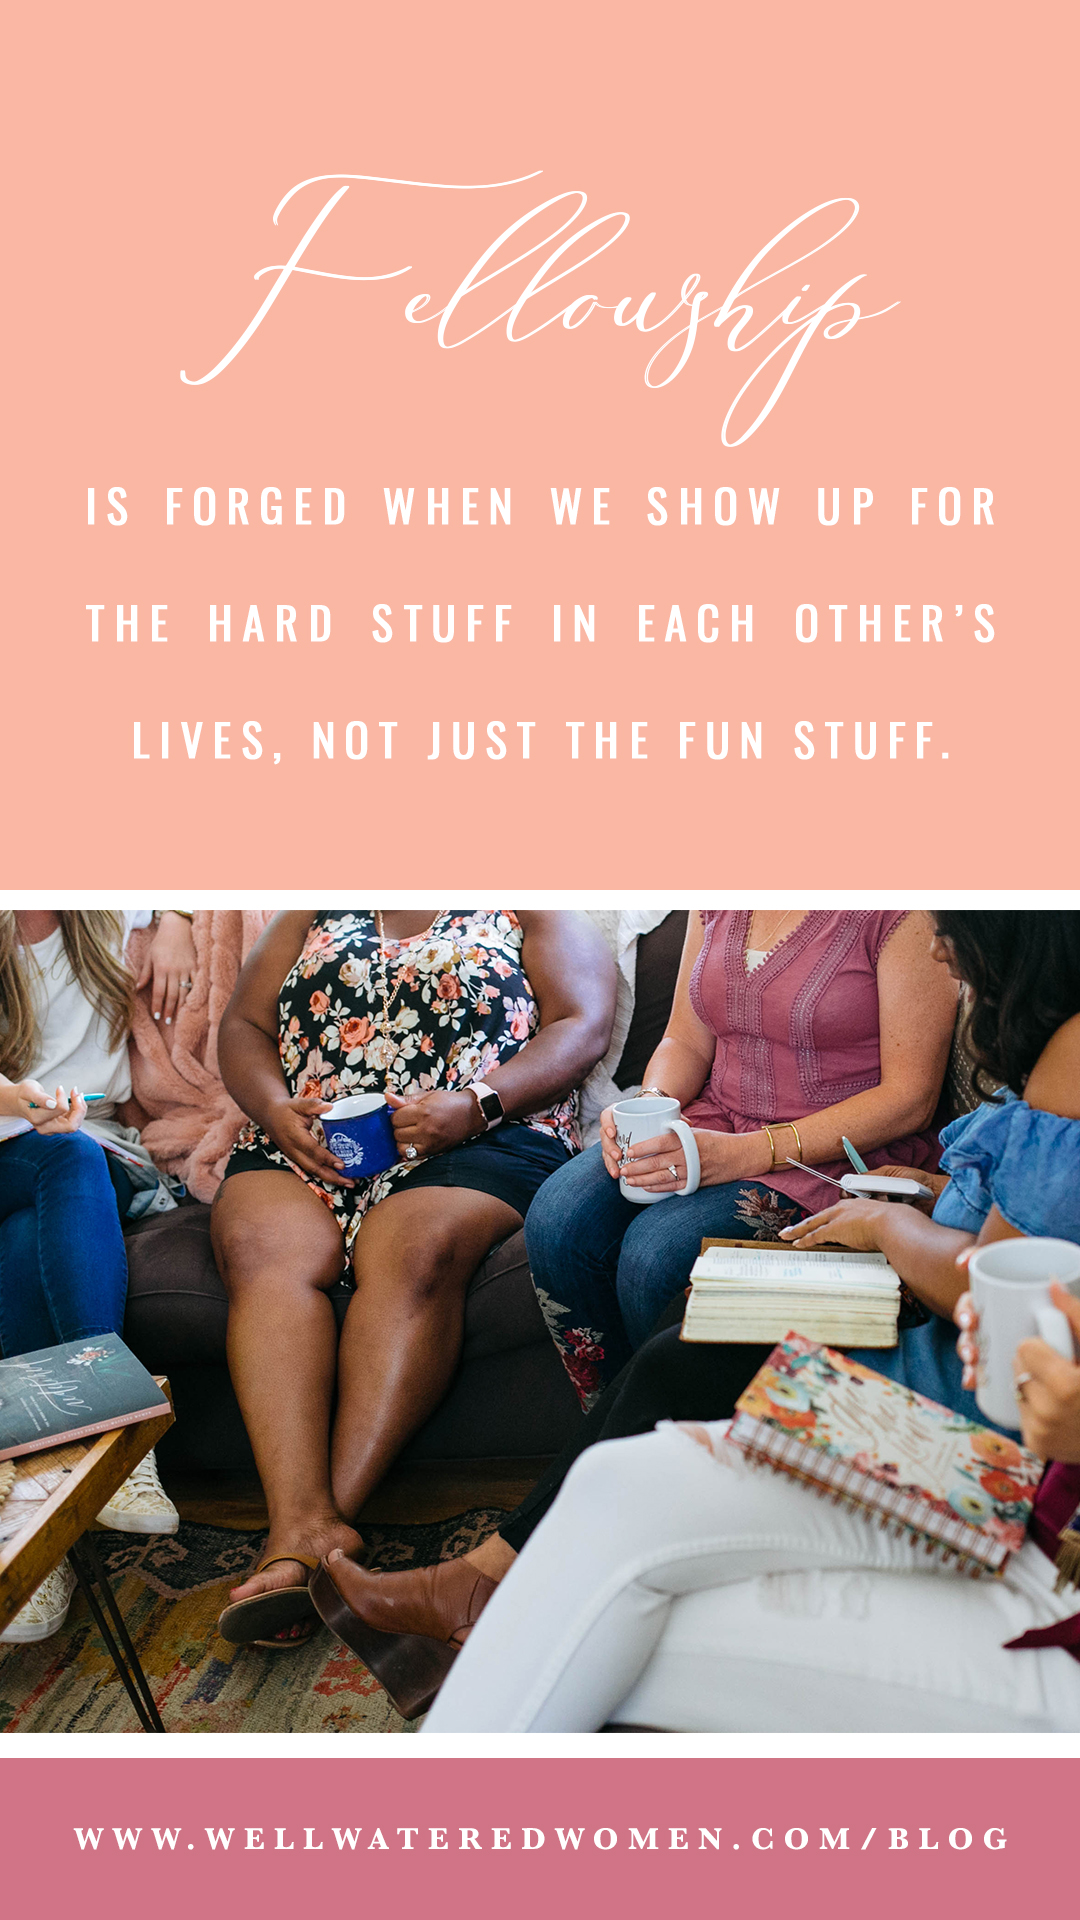 Fellowship is forged when we show up for the hard stuff in each other’s lives, not just the fun stuff. It allows other believers to get close enough to hold us spiritually accountable.